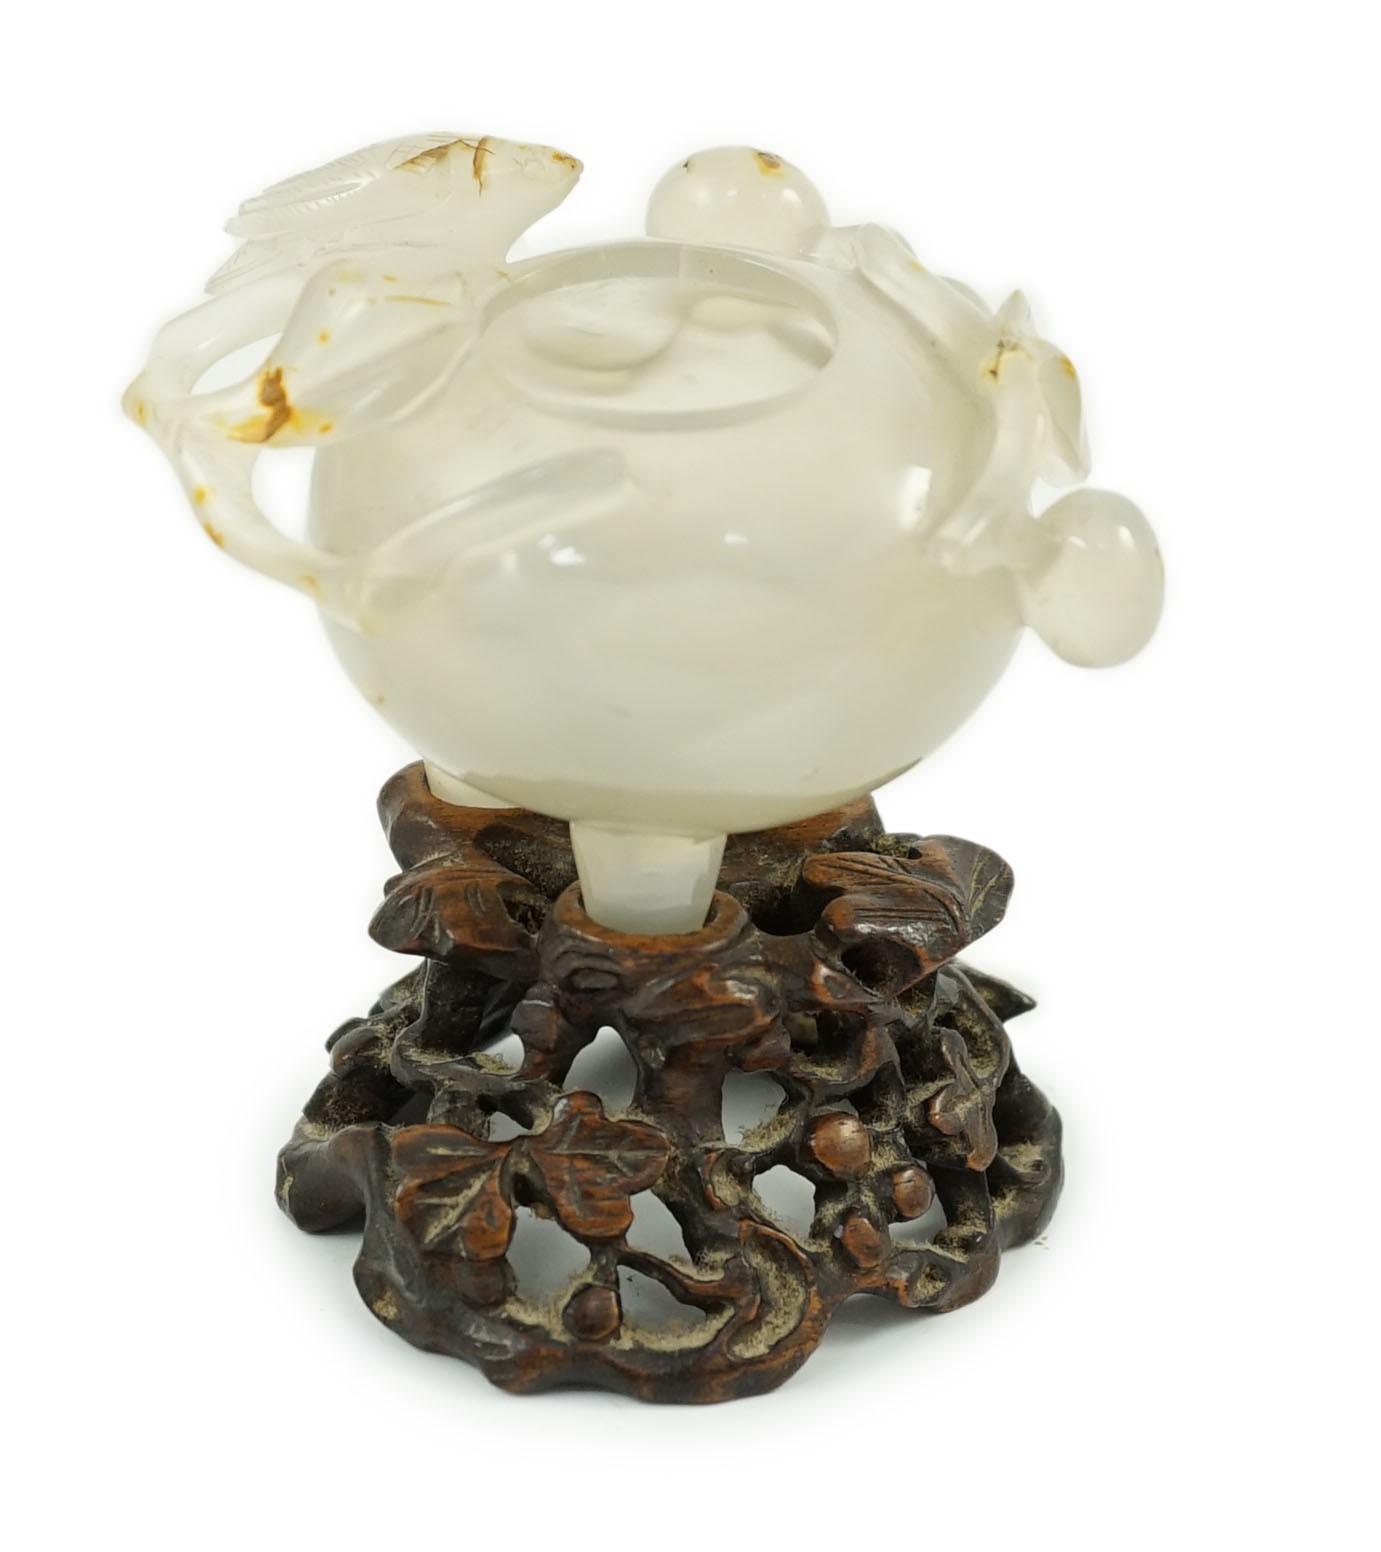 A Chinese small carved agate brushwasher on wooden stand, 19th century, 8.5cm high including stand